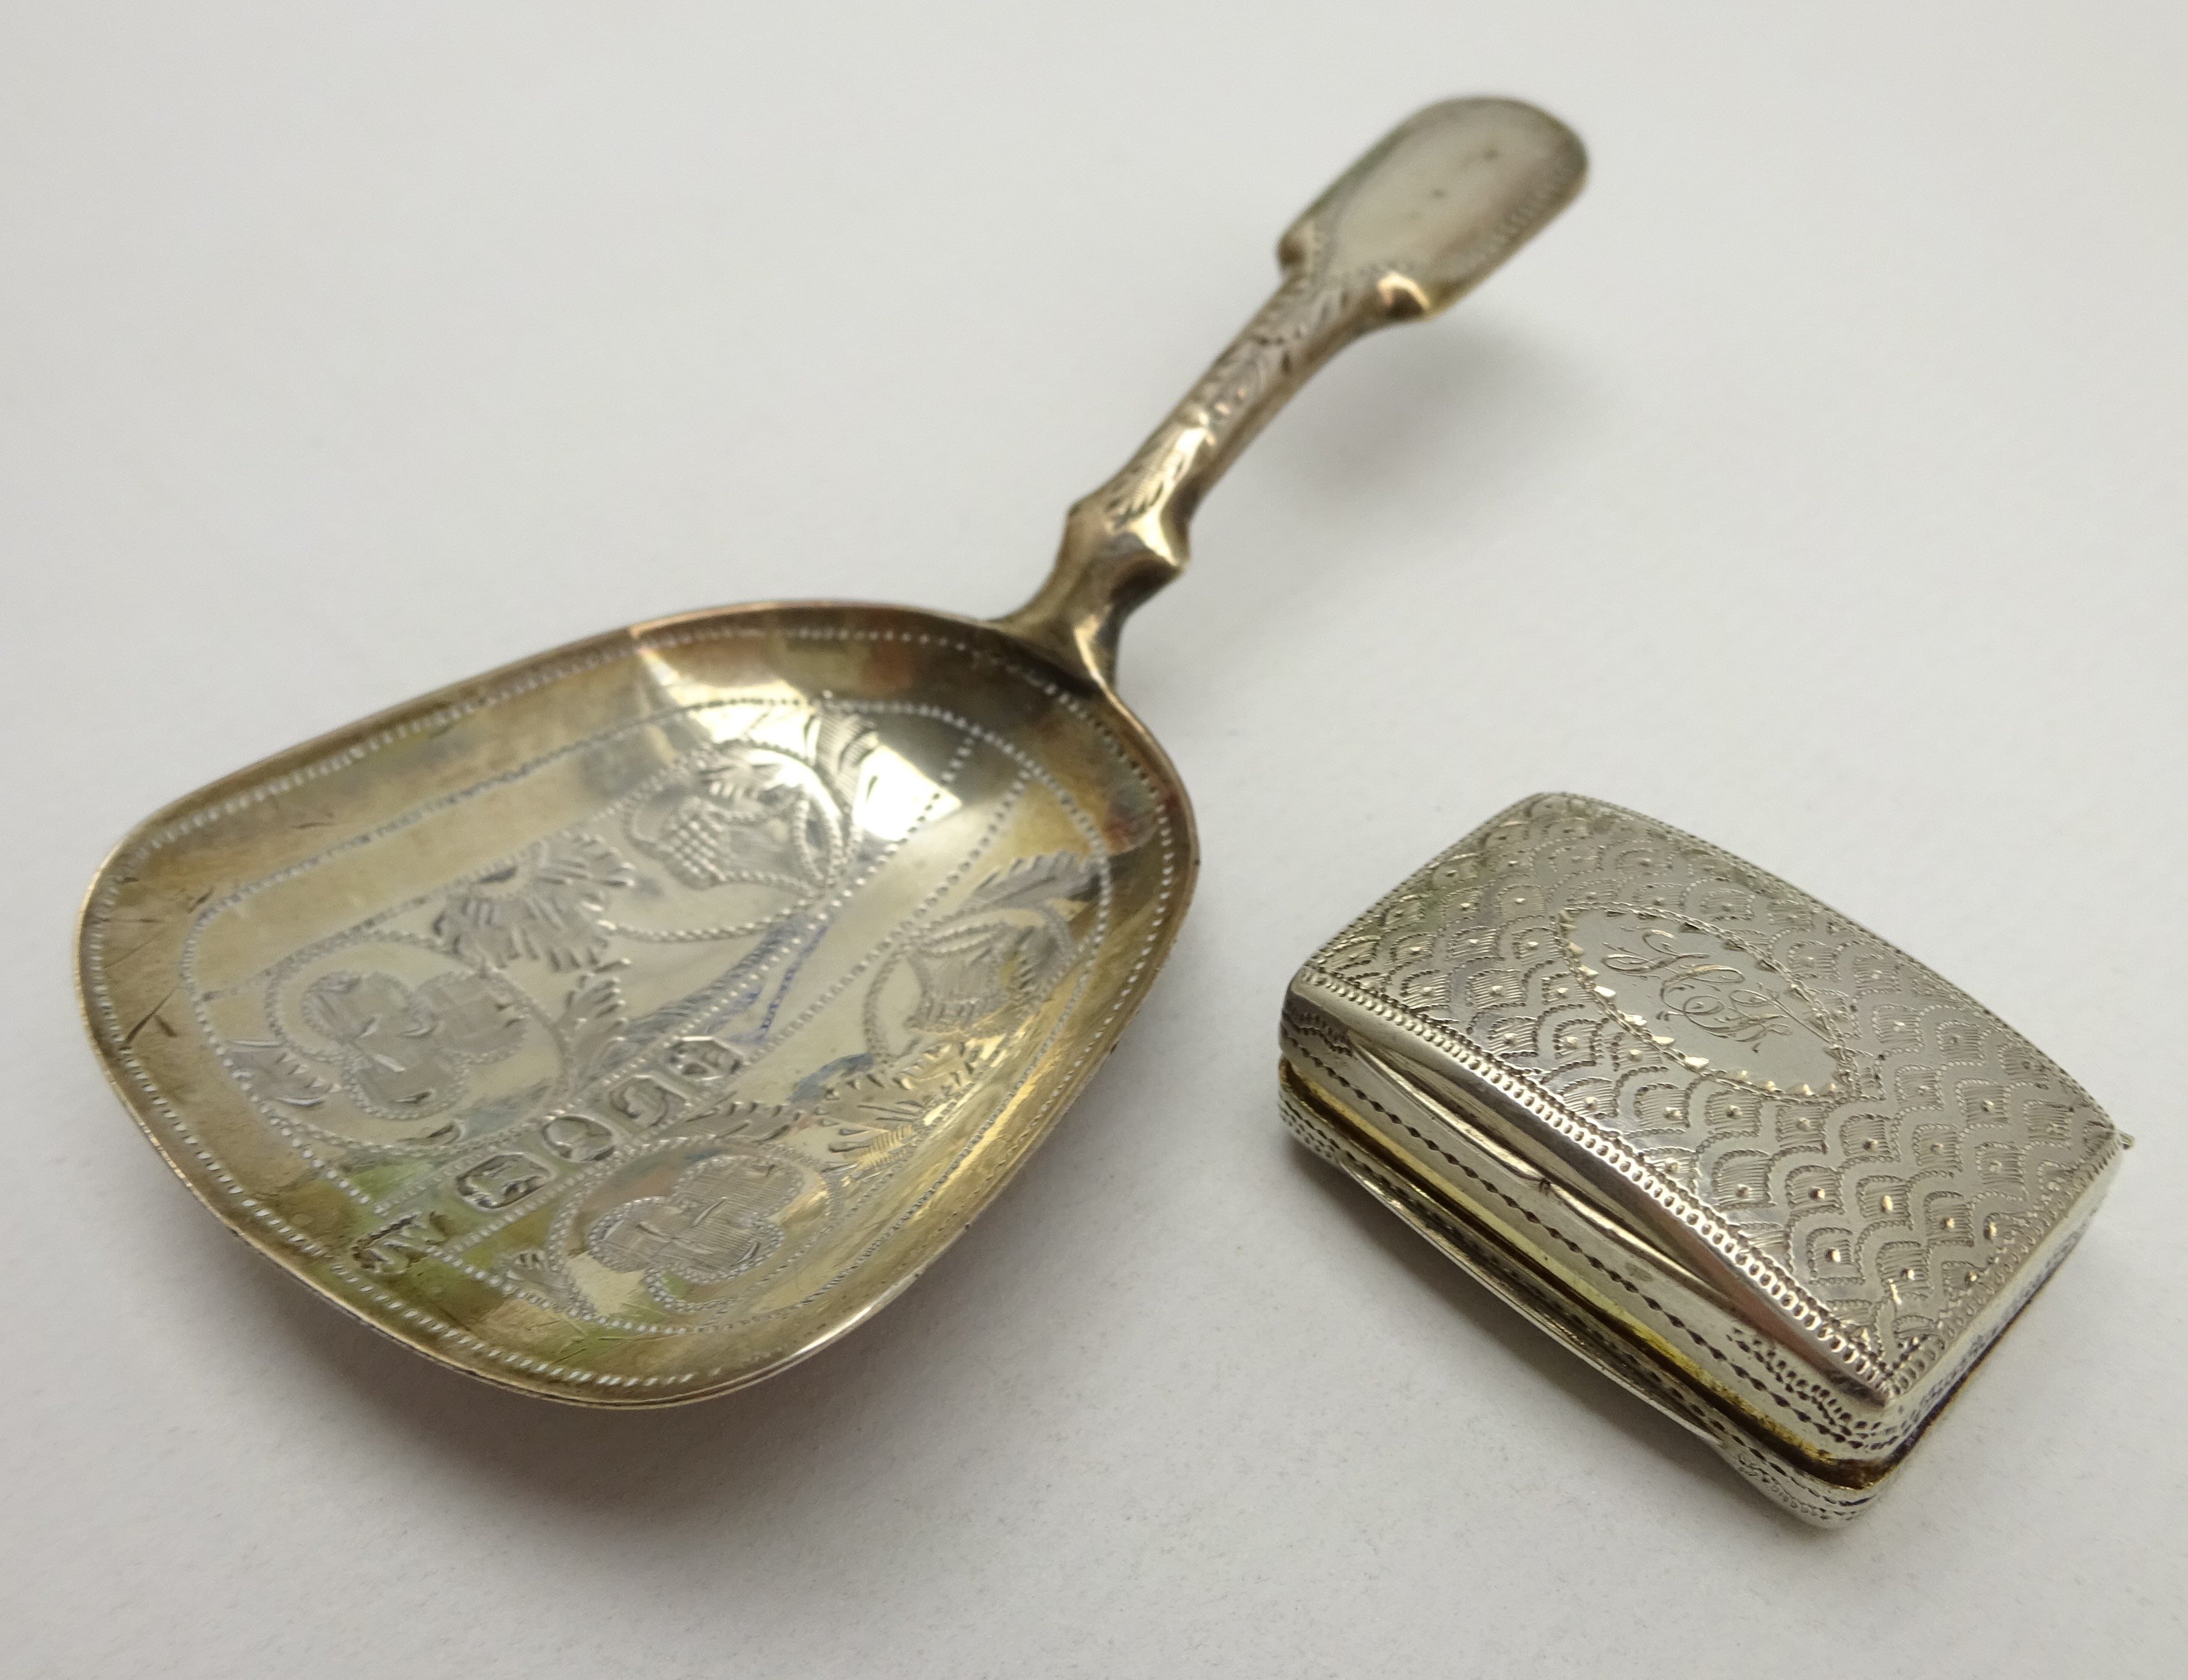 George IV small silver vinaigrette with pierced grille and engraved decoration Birmingham 1821